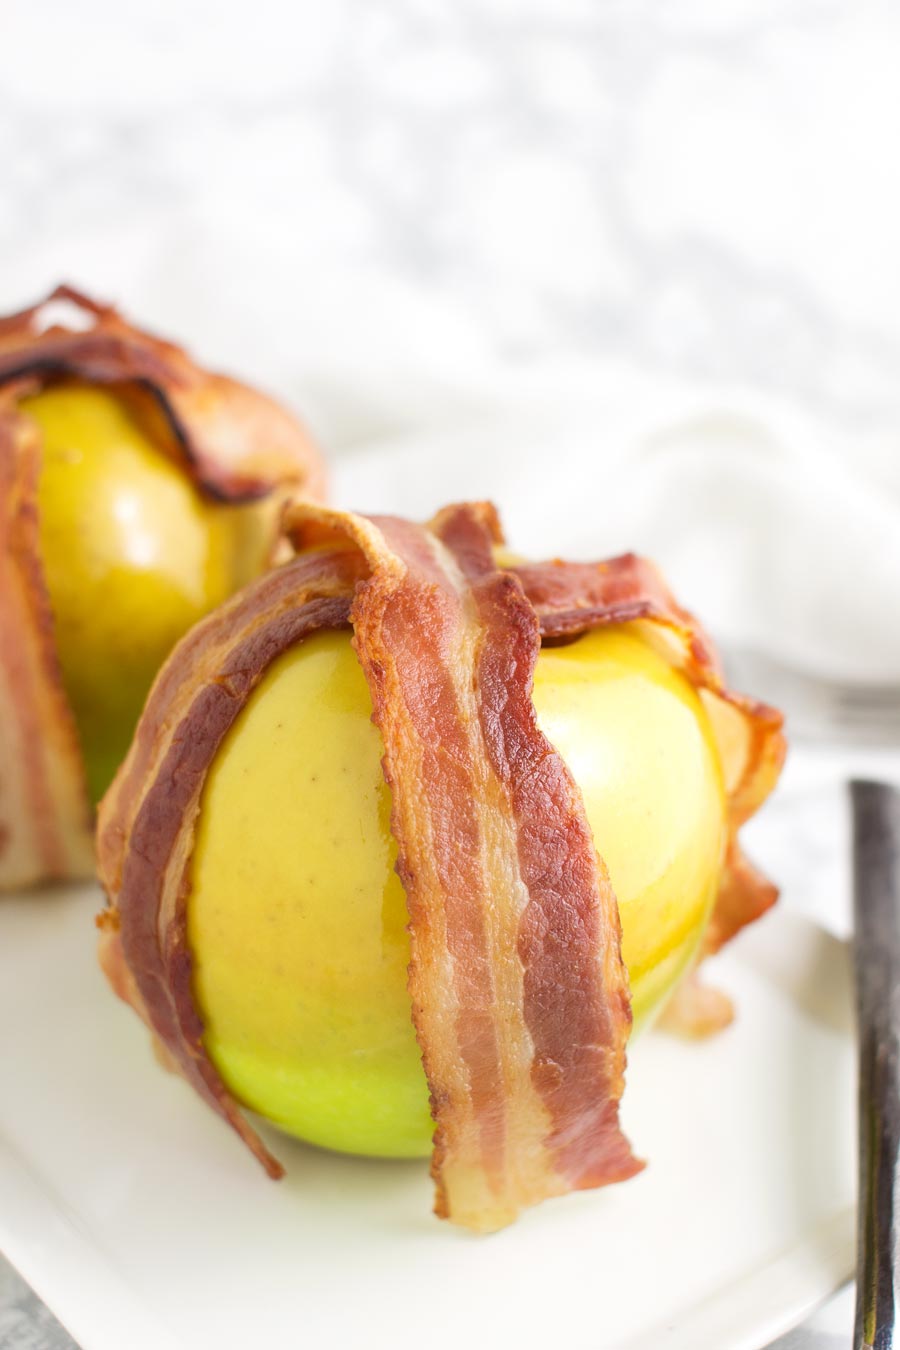 Bacon Baked Apples recipe from acleanplate.com #paleo #aip #autoimmuneprotocol